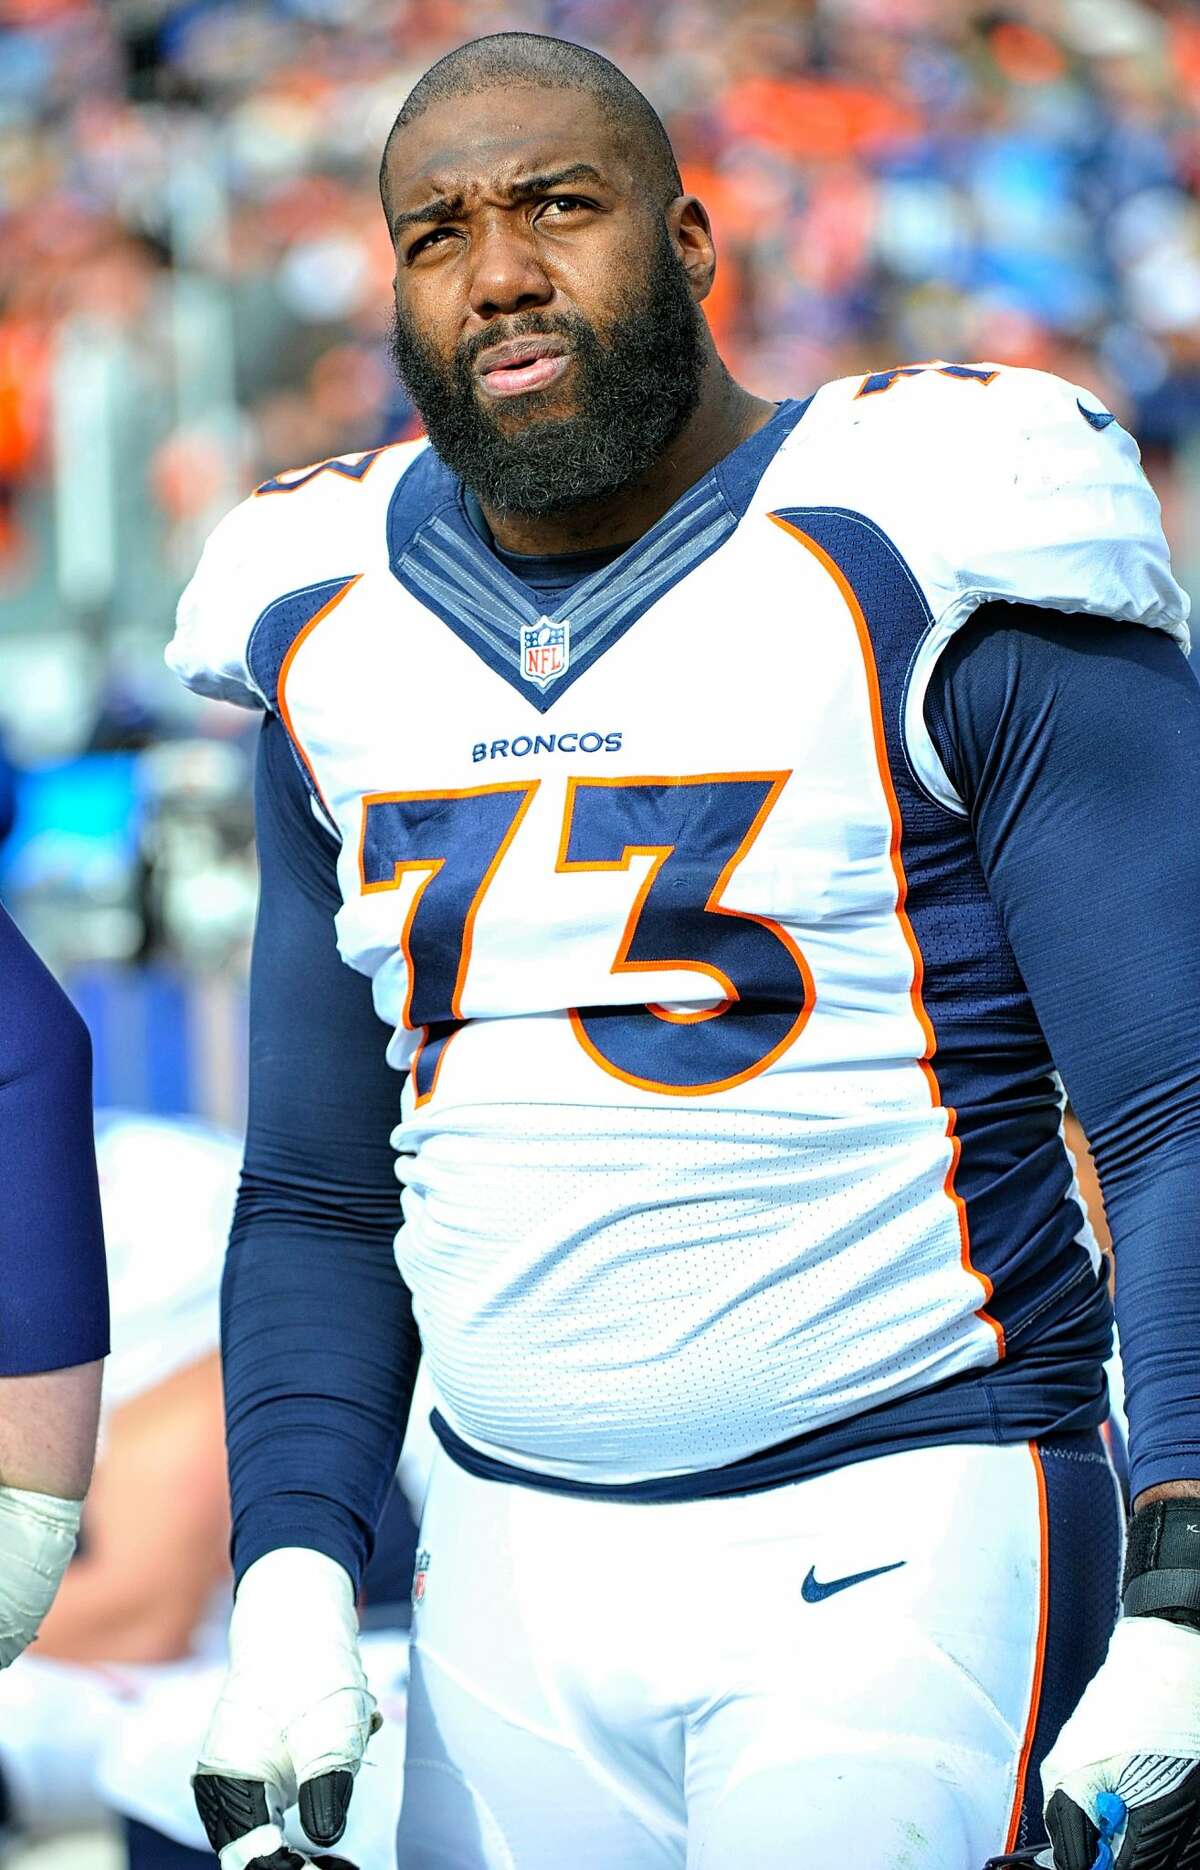 Russell Okung of the Denver Broncos watches from the sideline during a game against the Tennessee Titans at Nissan Stadium on December 11, 2016 in Nashville, Tennessee. (Photo by Frederick Breedon/Getty Images)